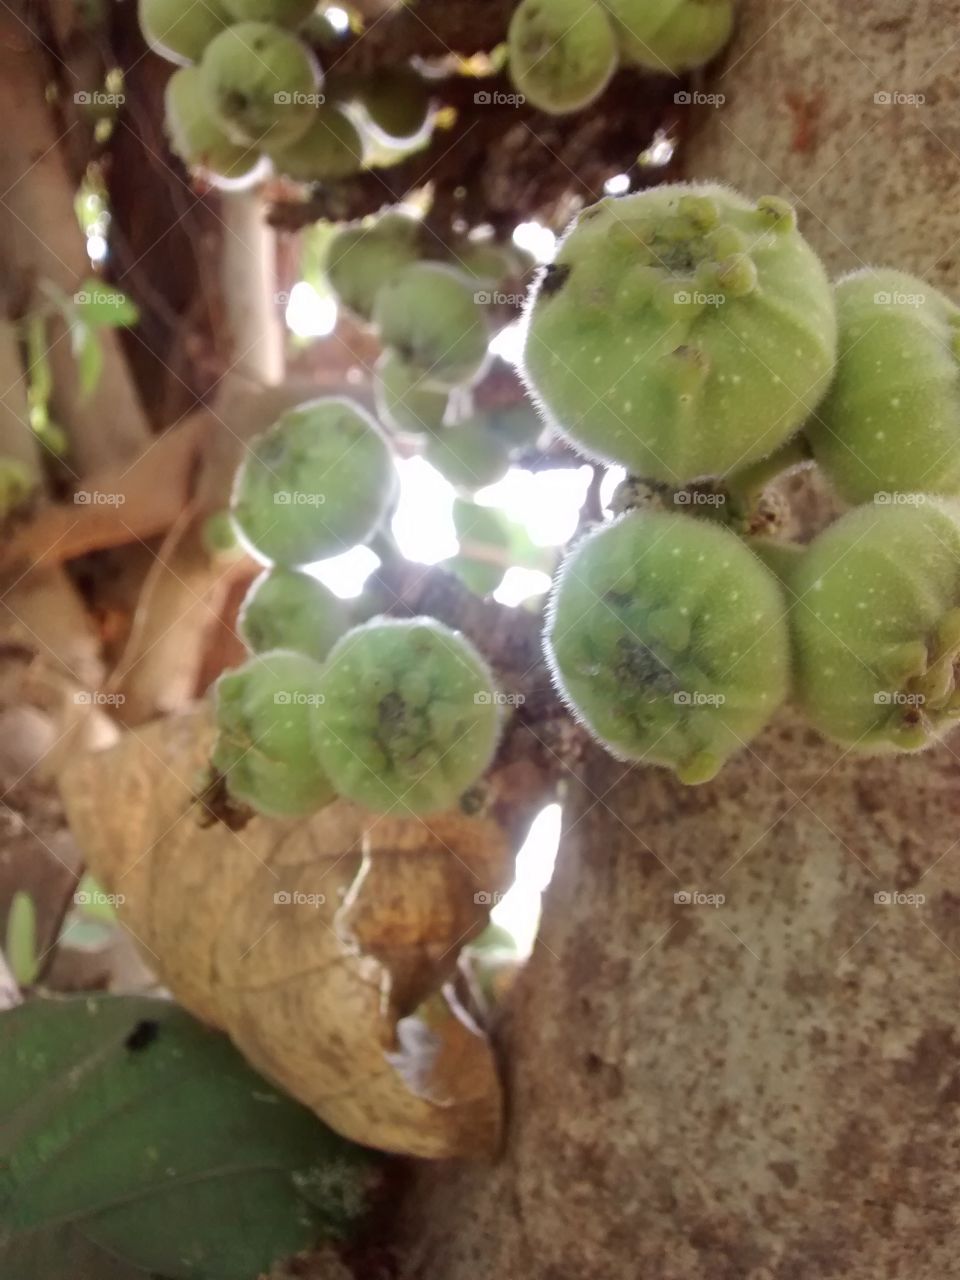 green fruit on branch.
round body.
summer time see.